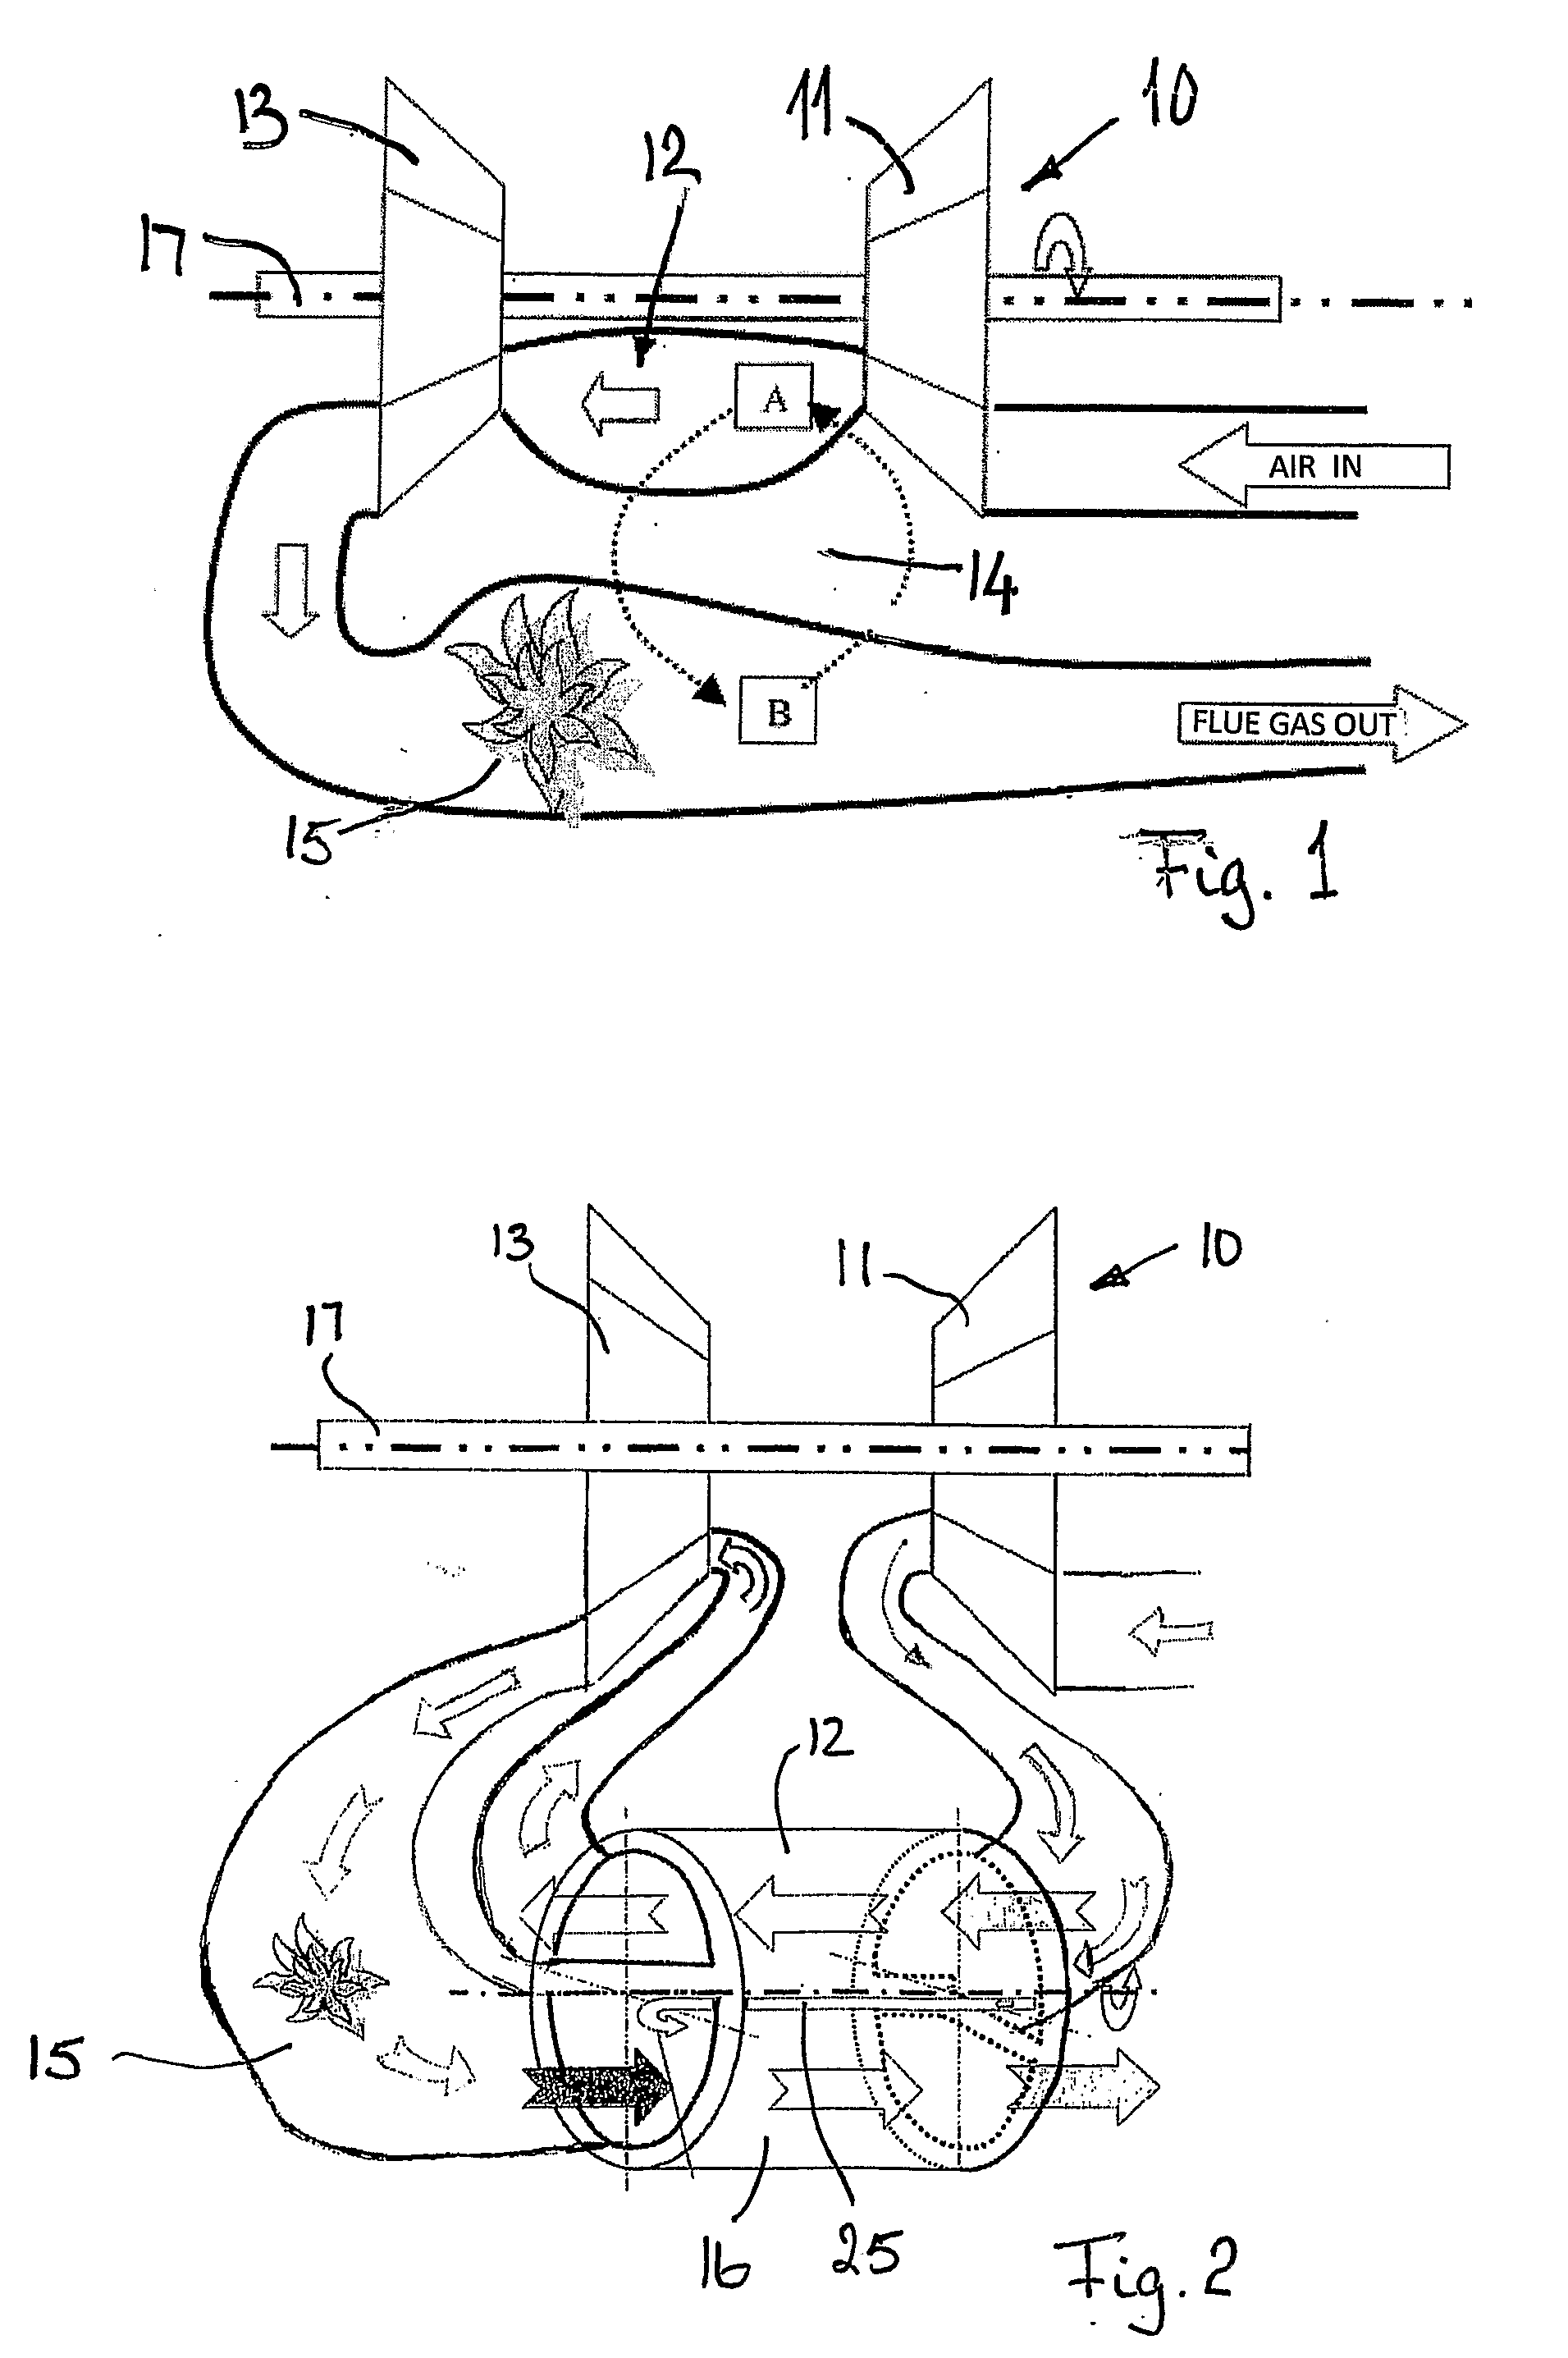 Gas turbine with external combustion, applying a rotating regenerating heat exchanger